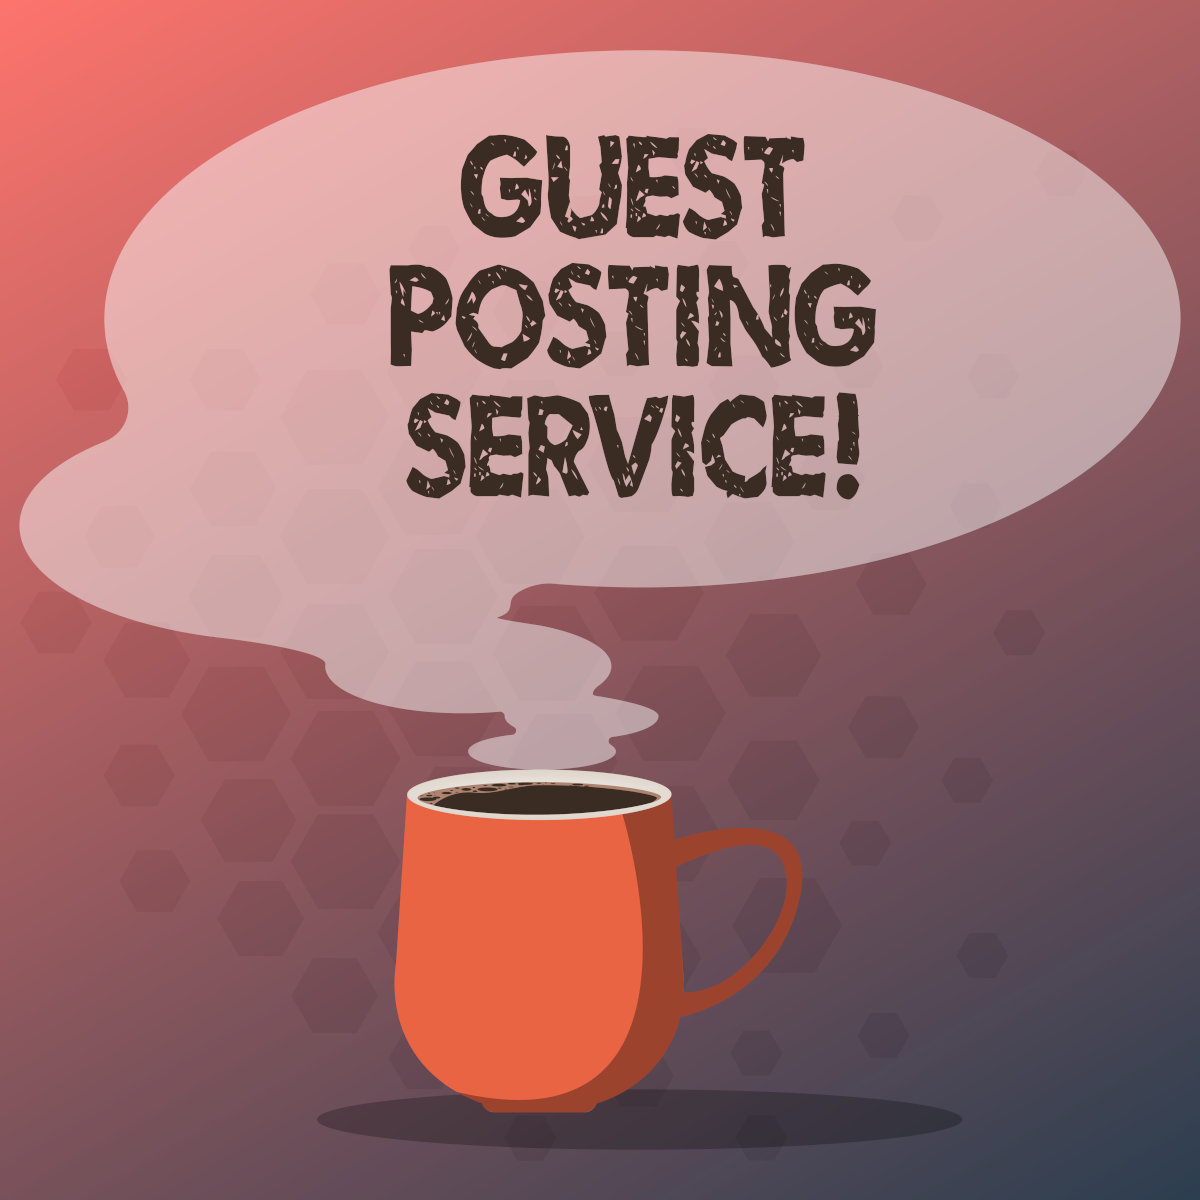 Who can benefit from guest posting?